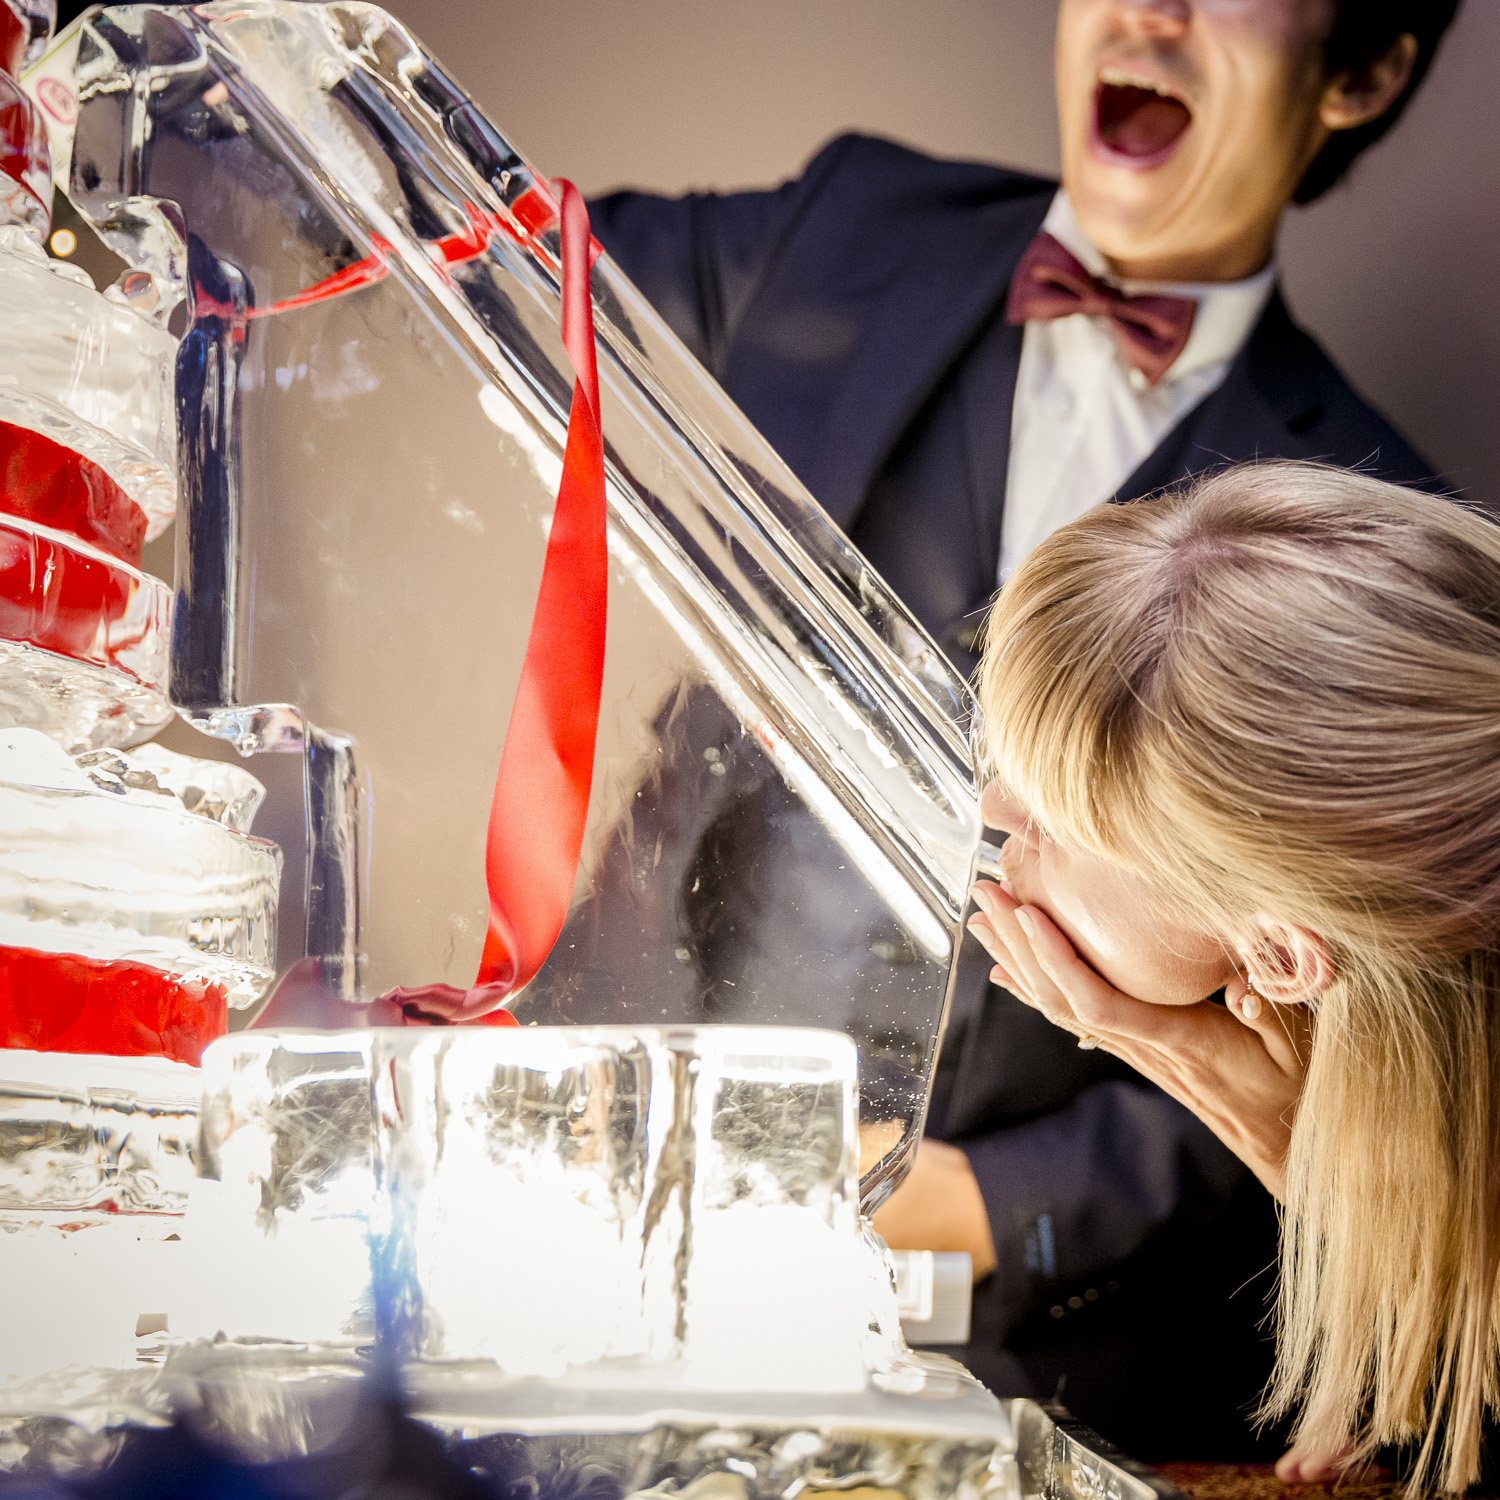 ice-luge-engagement-party-photographer-5.jpg